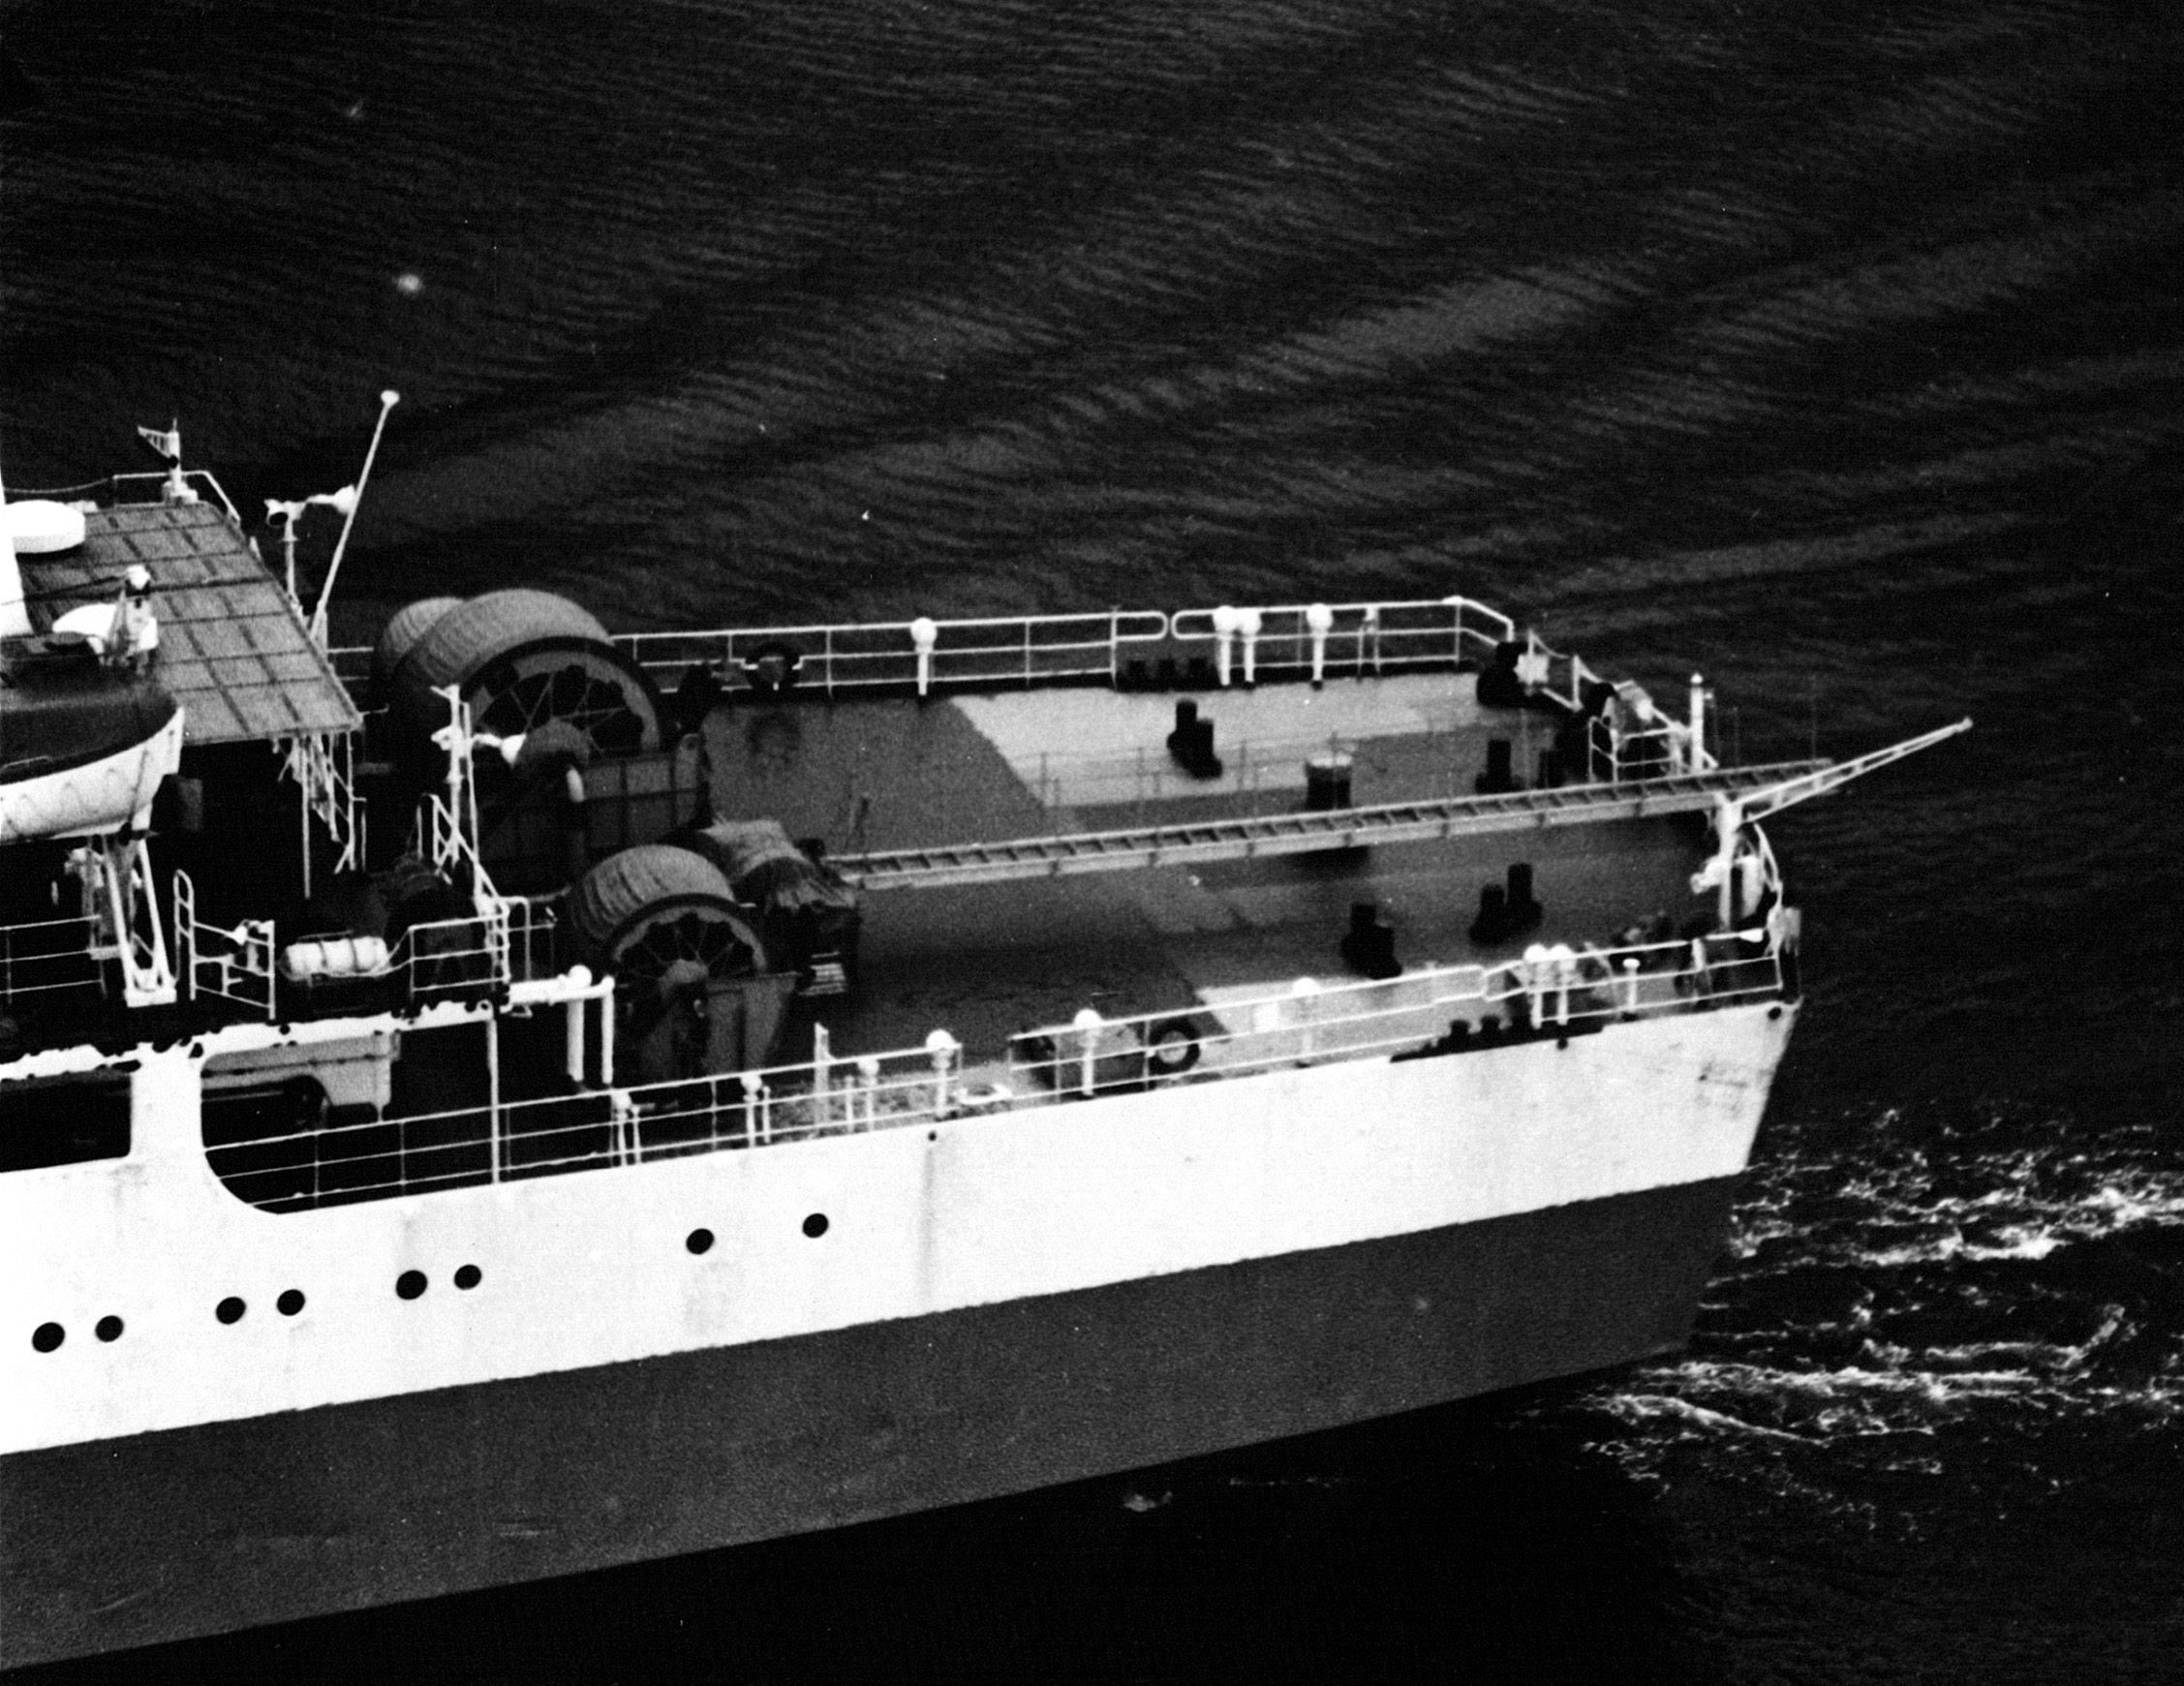 IRKUT : Dubna class VT over-the-stern refueling hoses aft: Pacific : 1983 :G. Jacobs Collection.jpeg